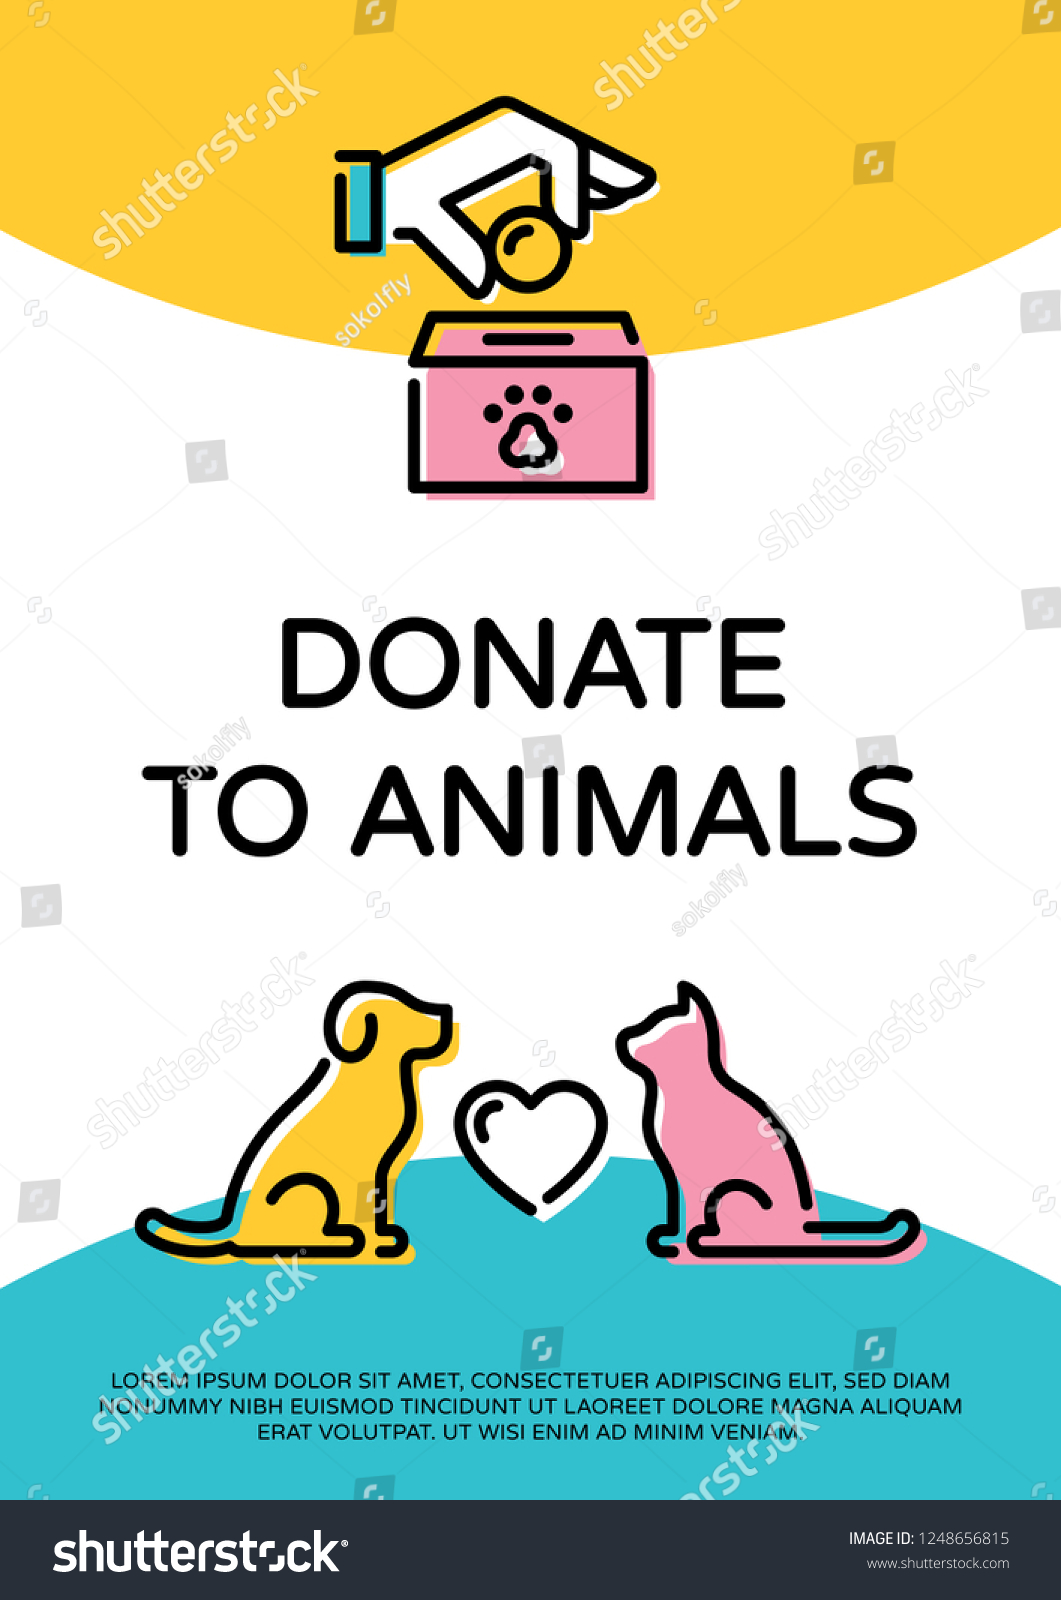 Donate animals. Баннер donate. Donations for Pets. Charity banner for animals.